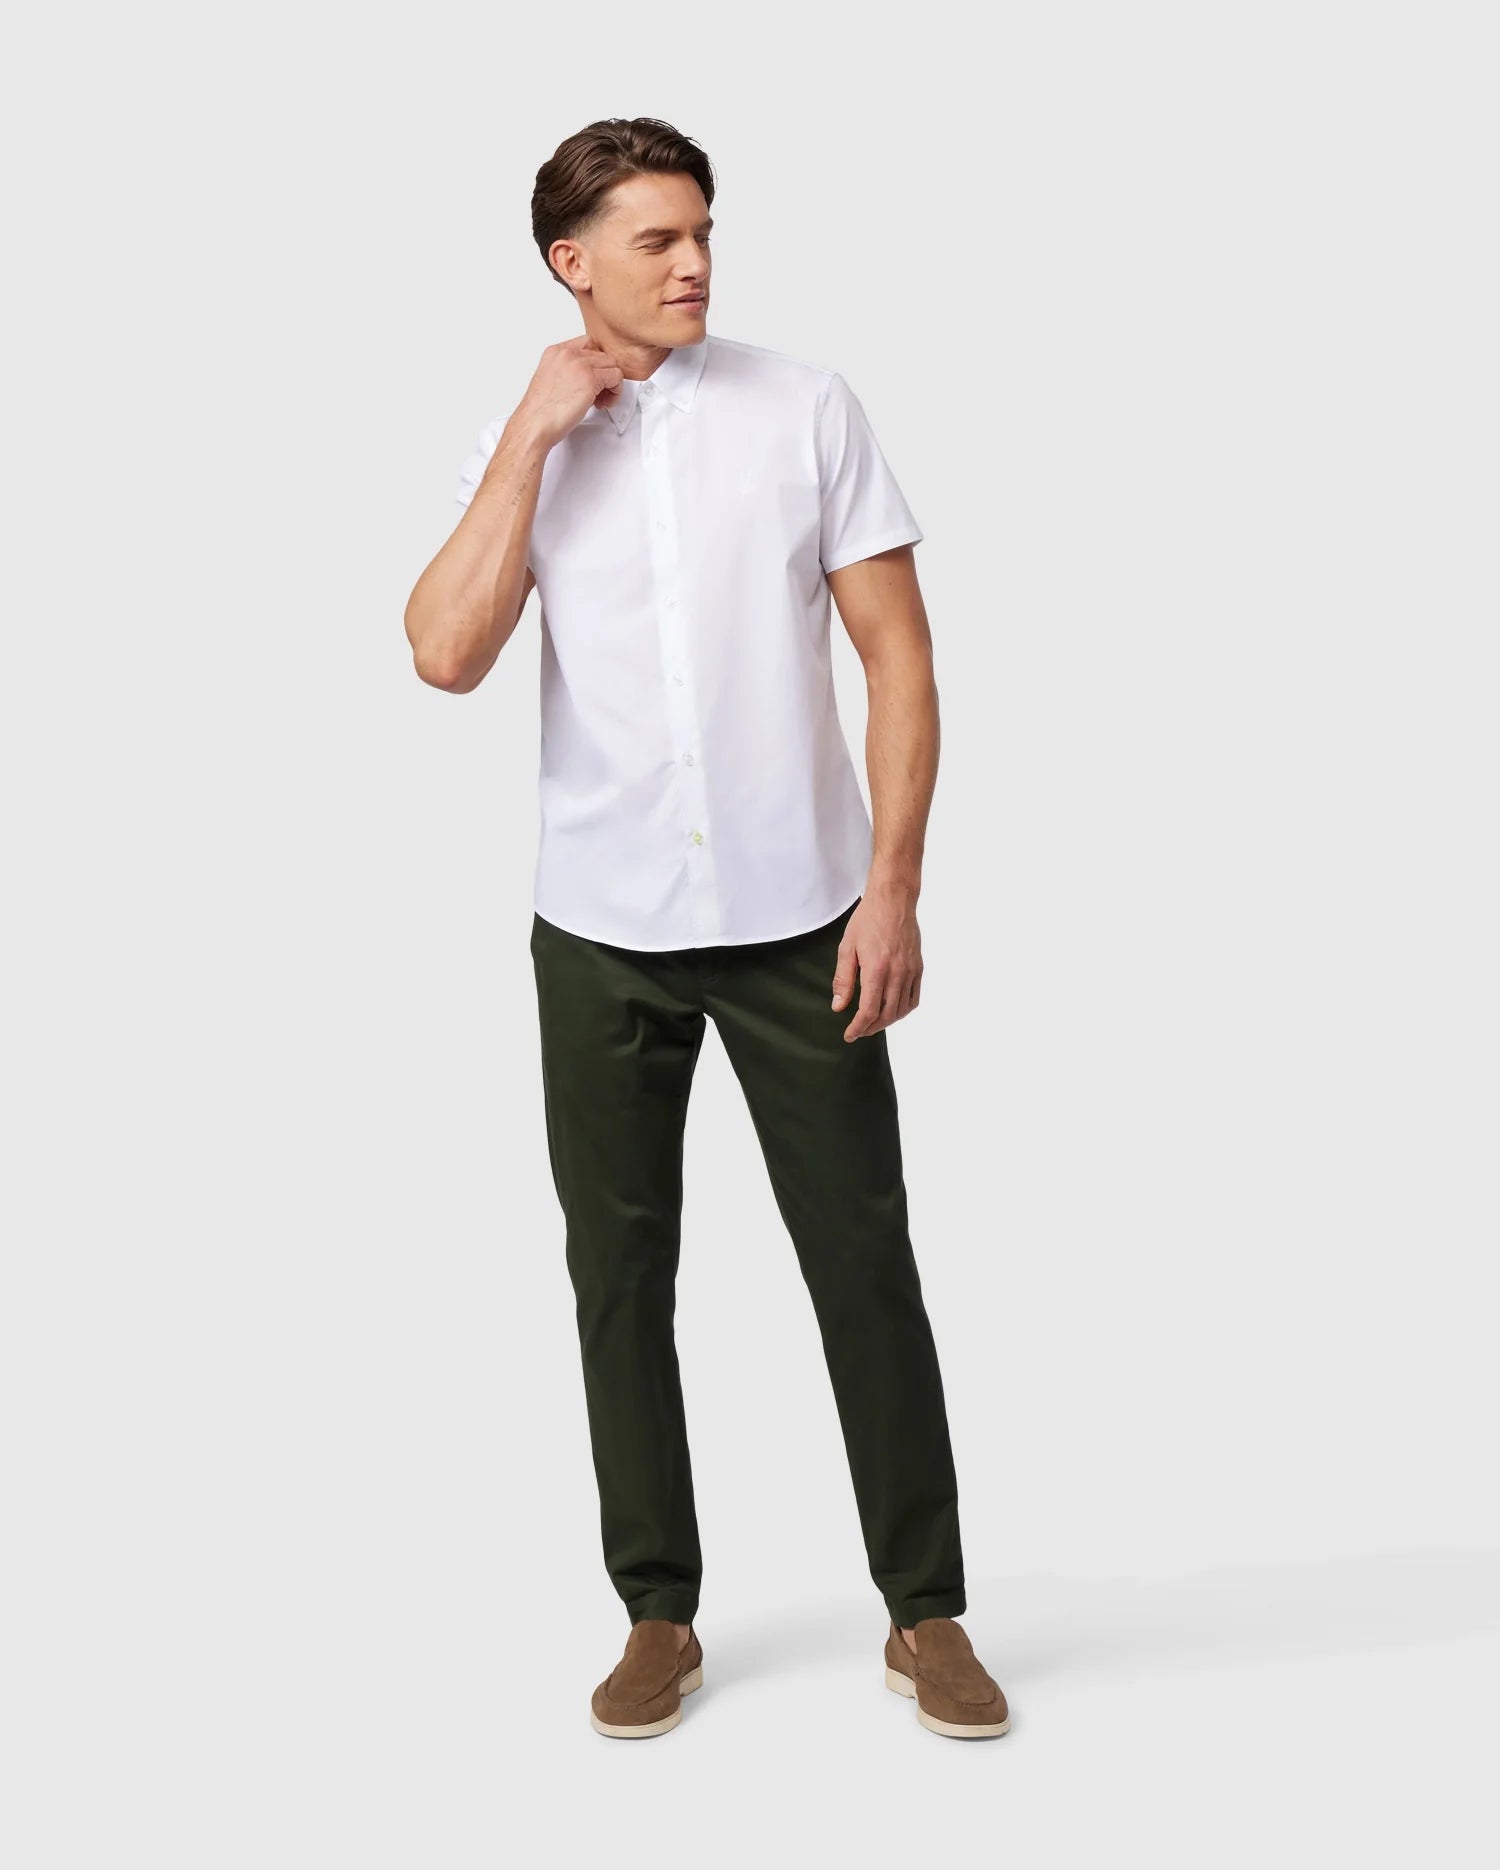 Psycho Bunny Canada  Men's Shirts Collection - Elevate Your Wardrobe